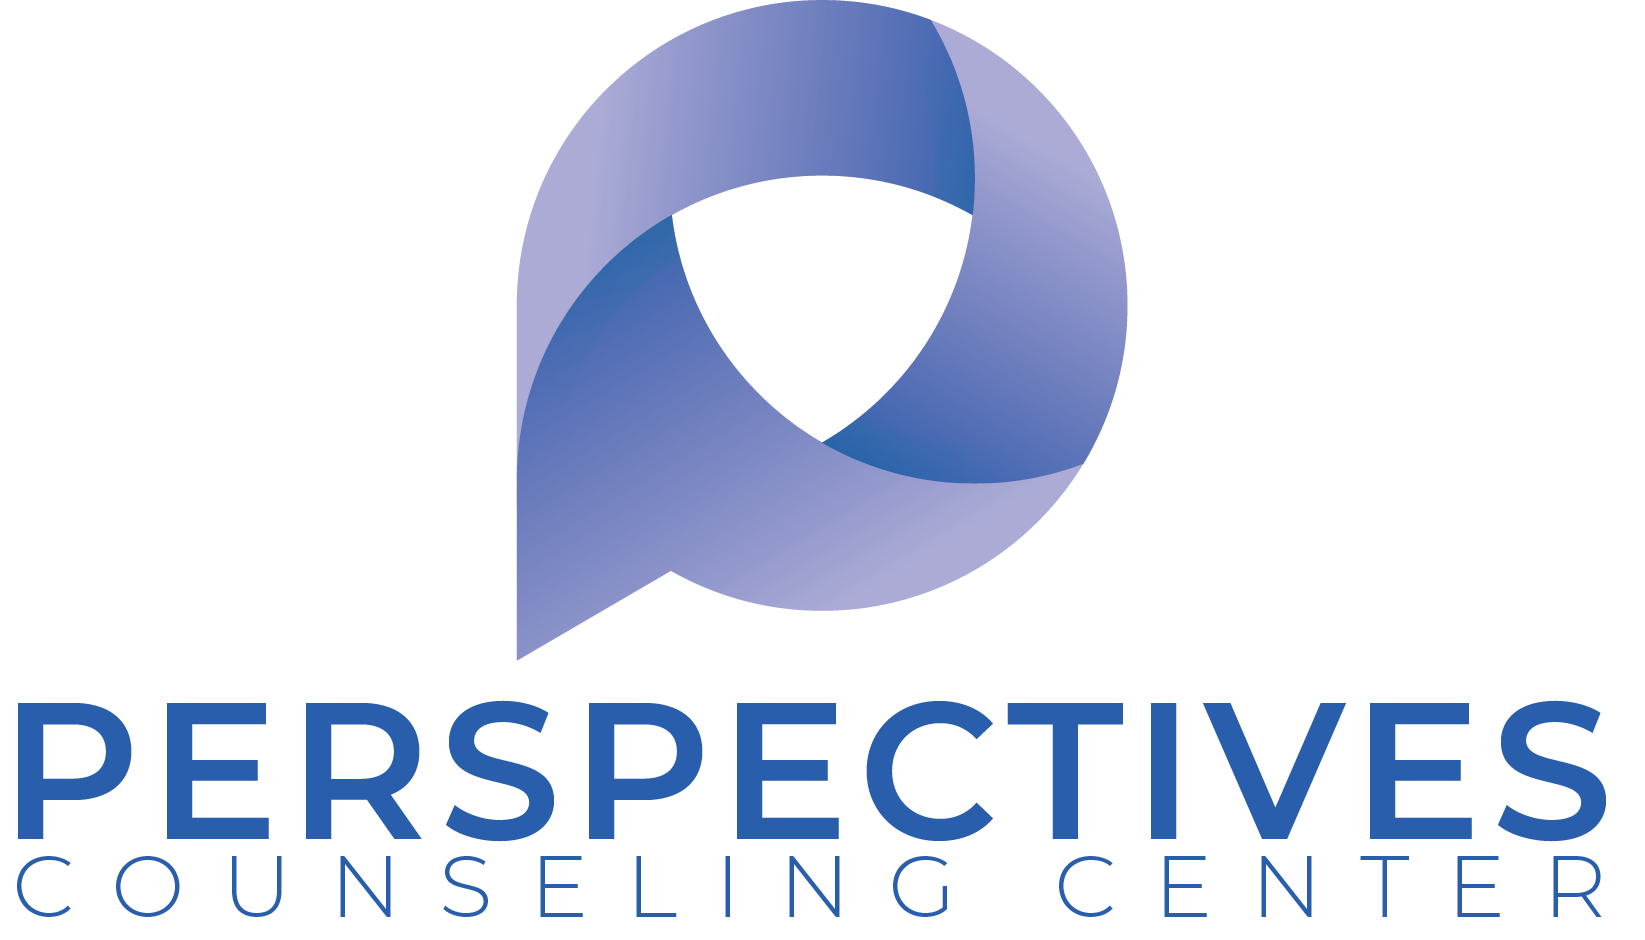 Perspectives Counseling Center logo 